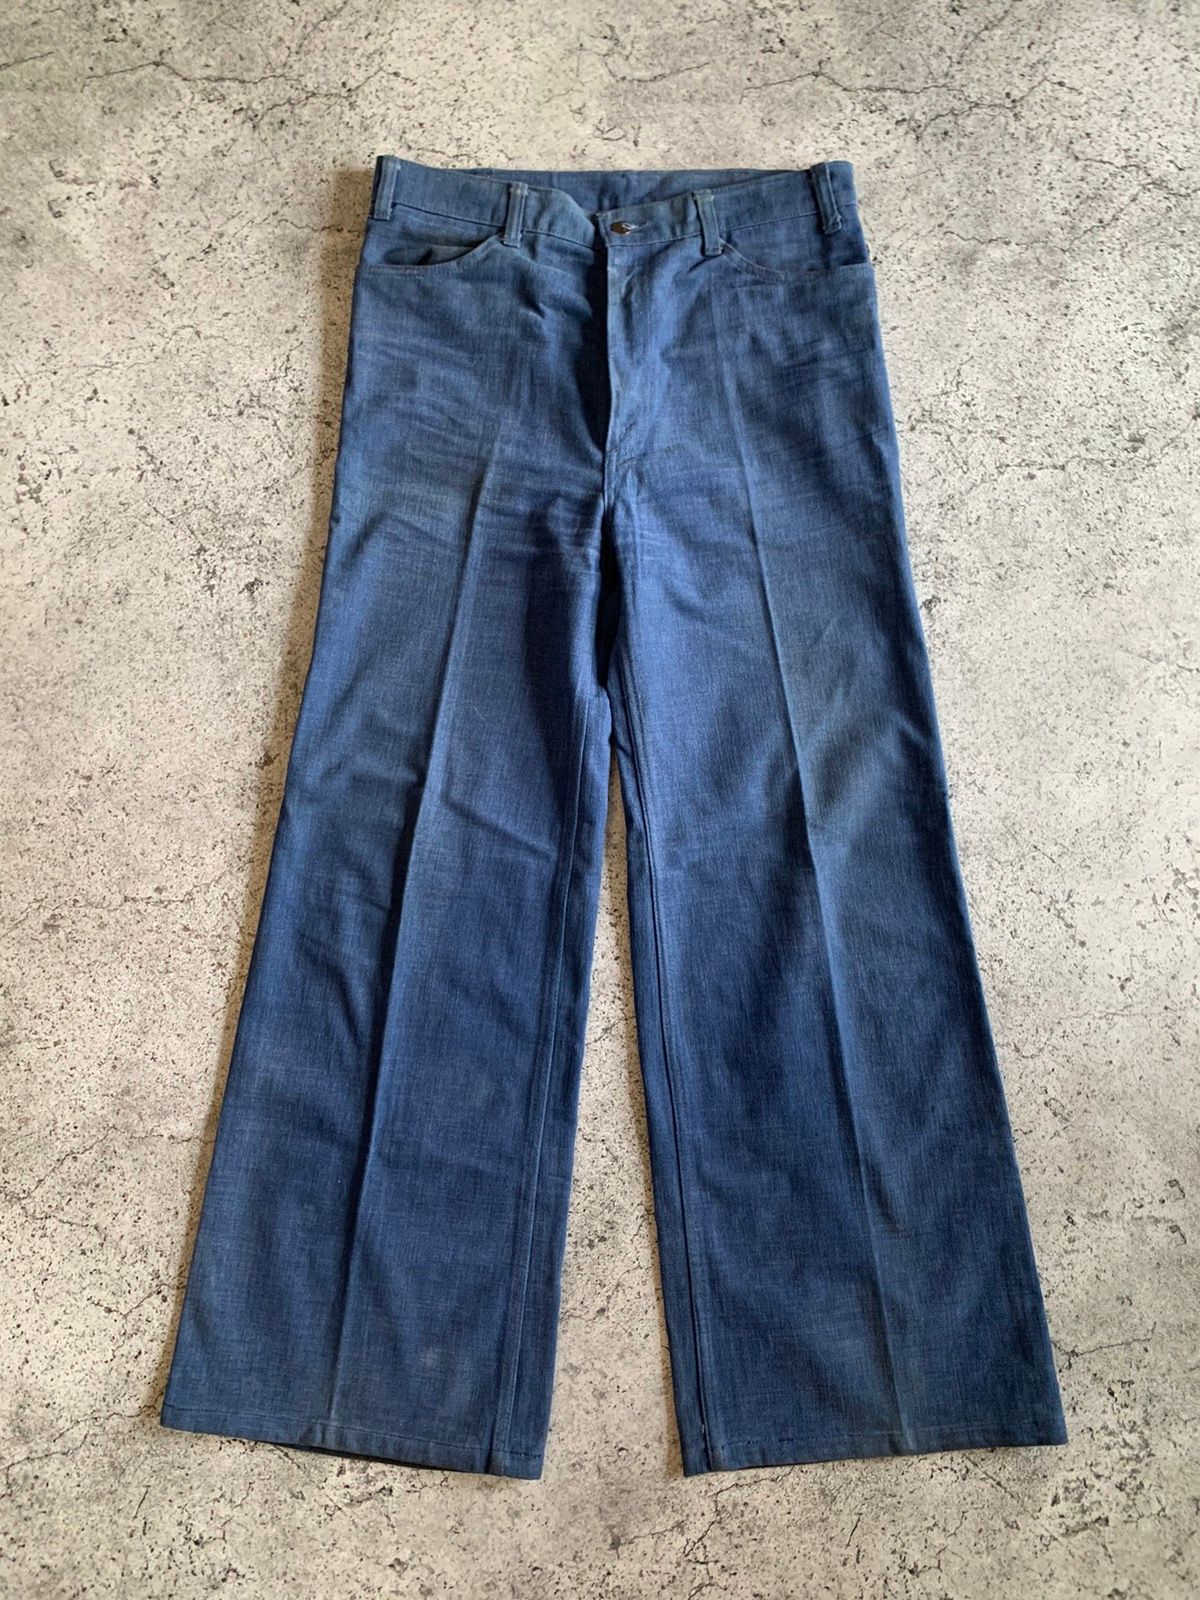 Pre-owned Levis X Levis Vintage Clothing Levi's Vintage Bell Bottom Chore Flared 1970s Pants In Navy